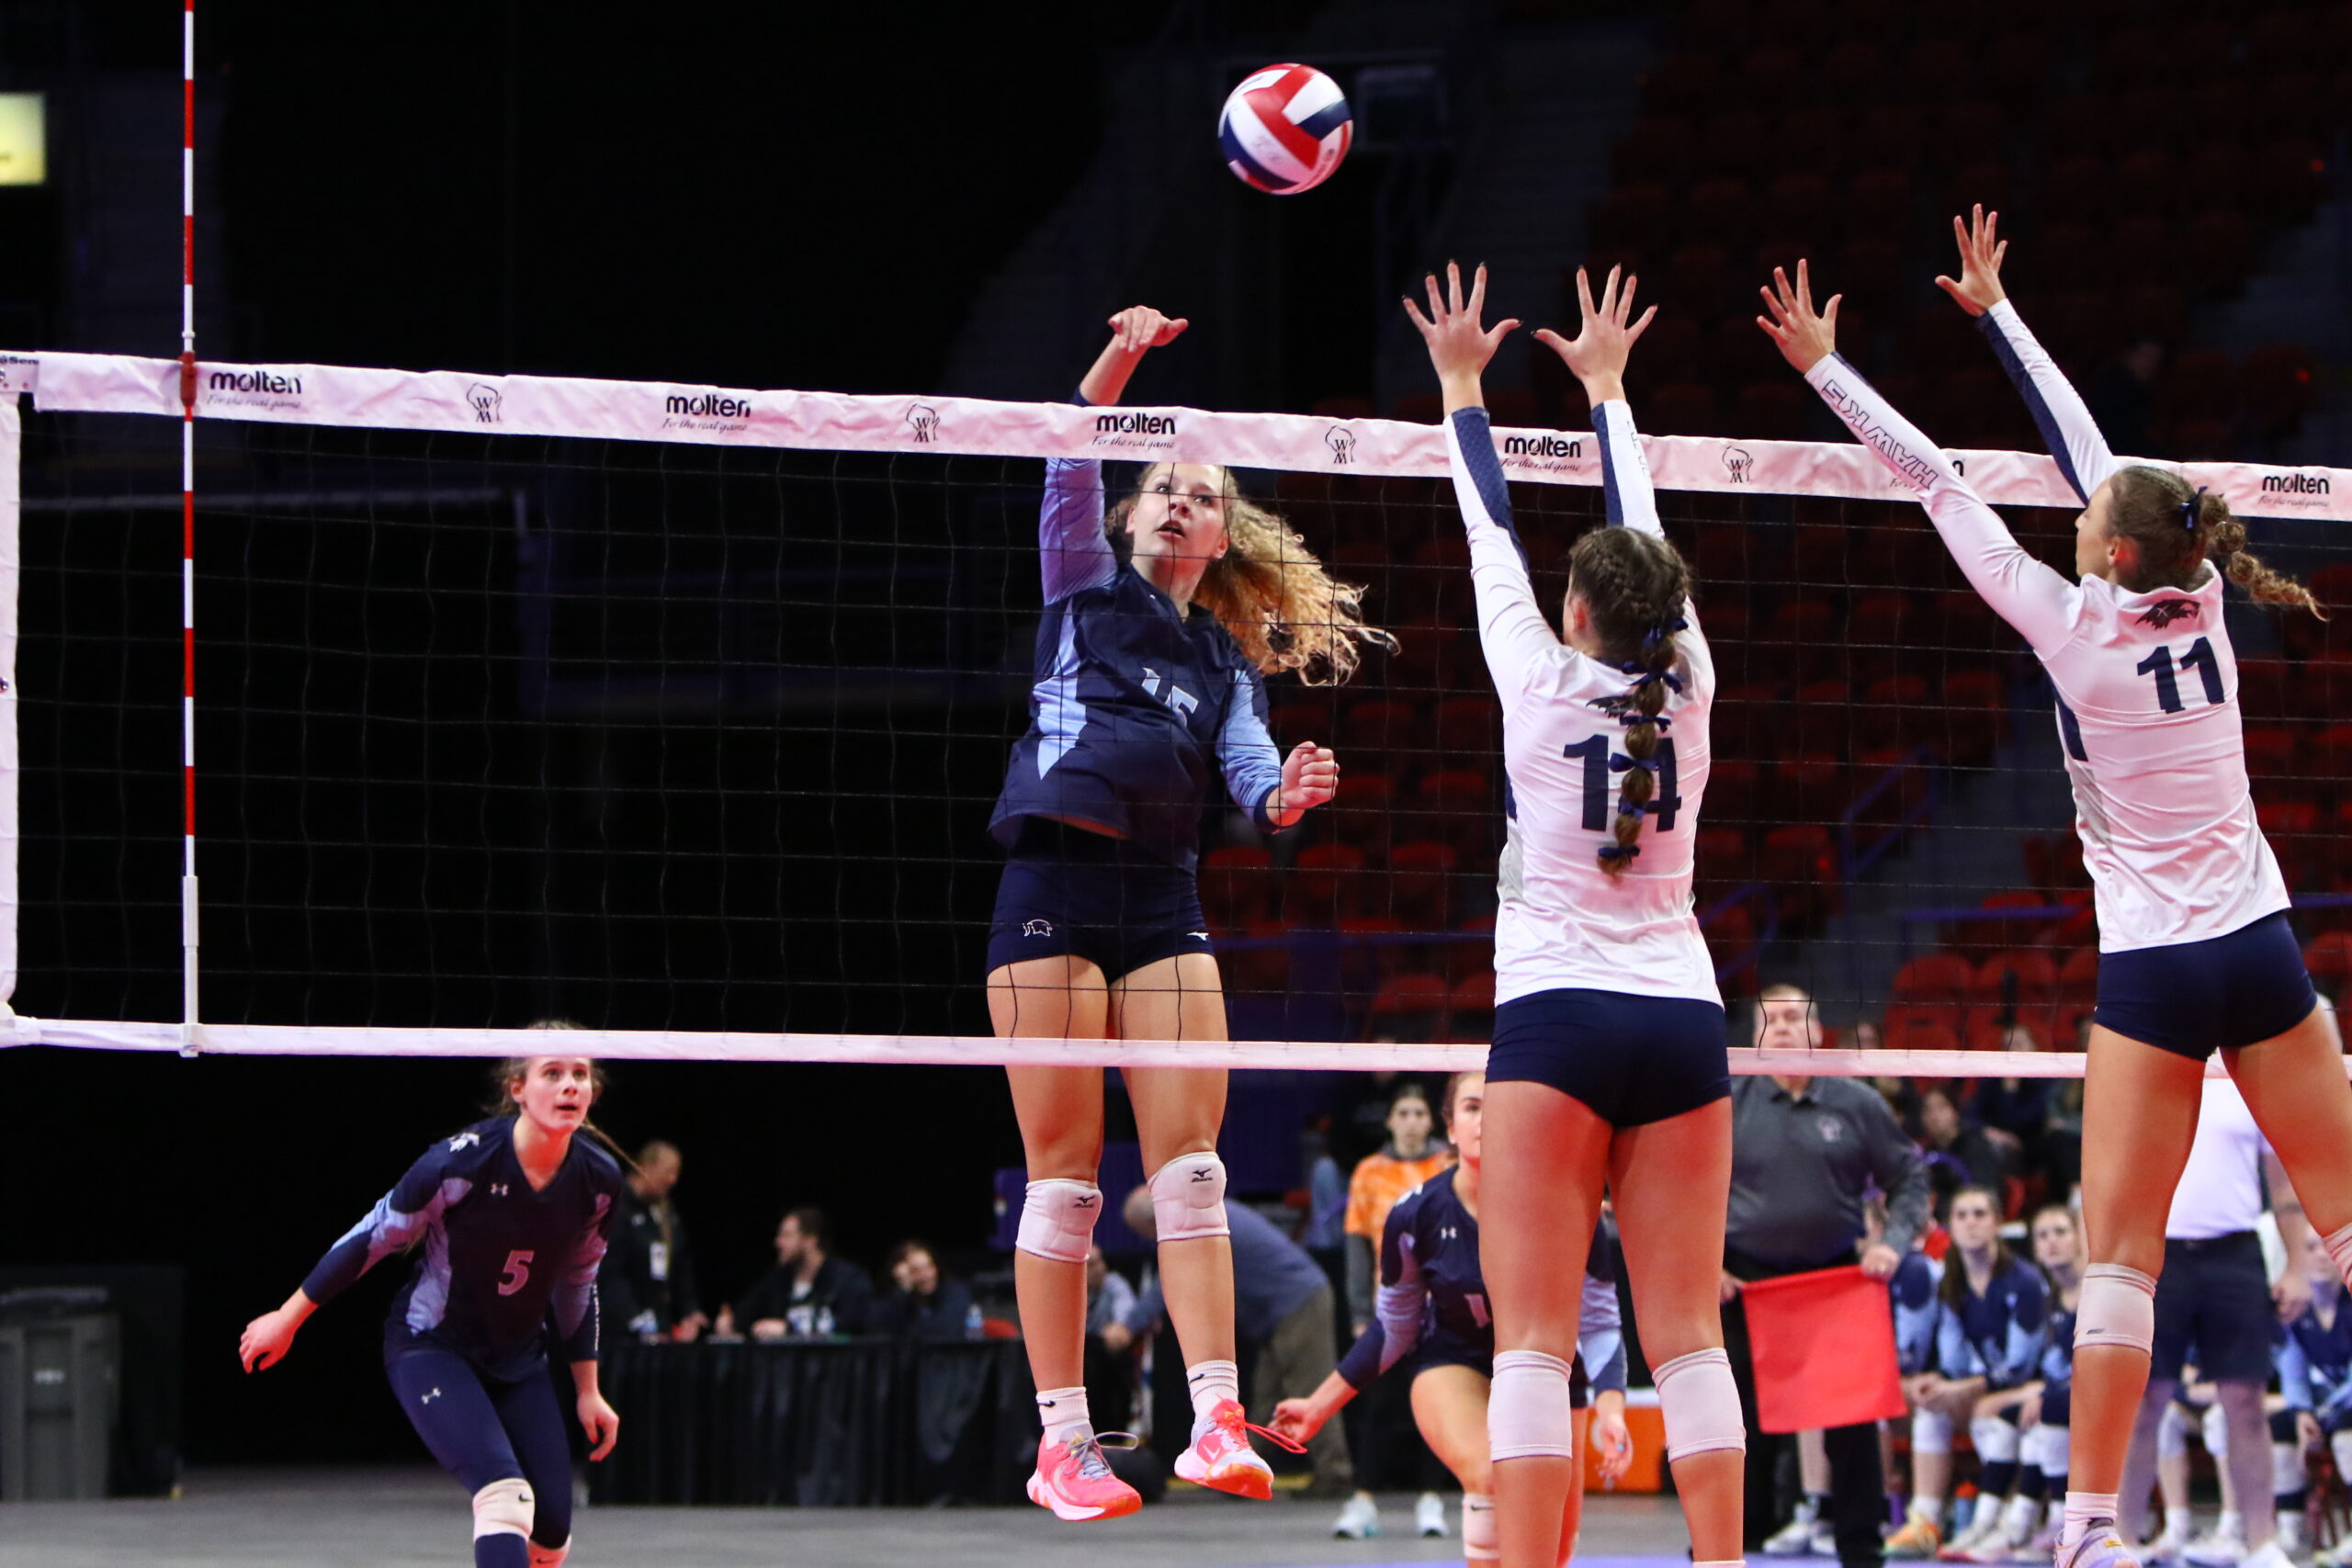 A high school girls volleyball athlete attempts to hit the ball away from two opposing players.